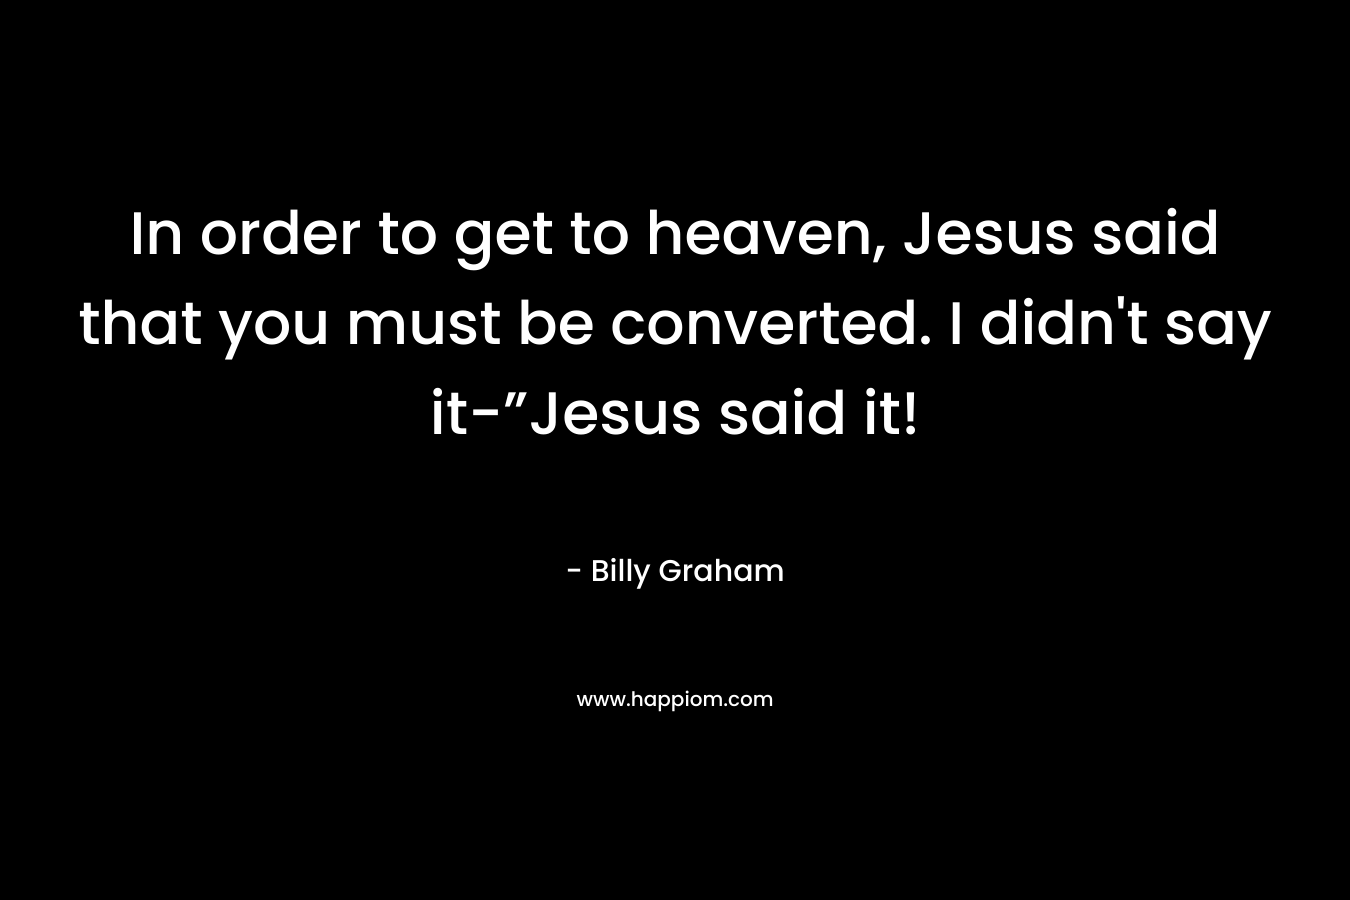 In order to get to heaven, Jesus said that you must be converted. I didn't say it-”Jesus said it!